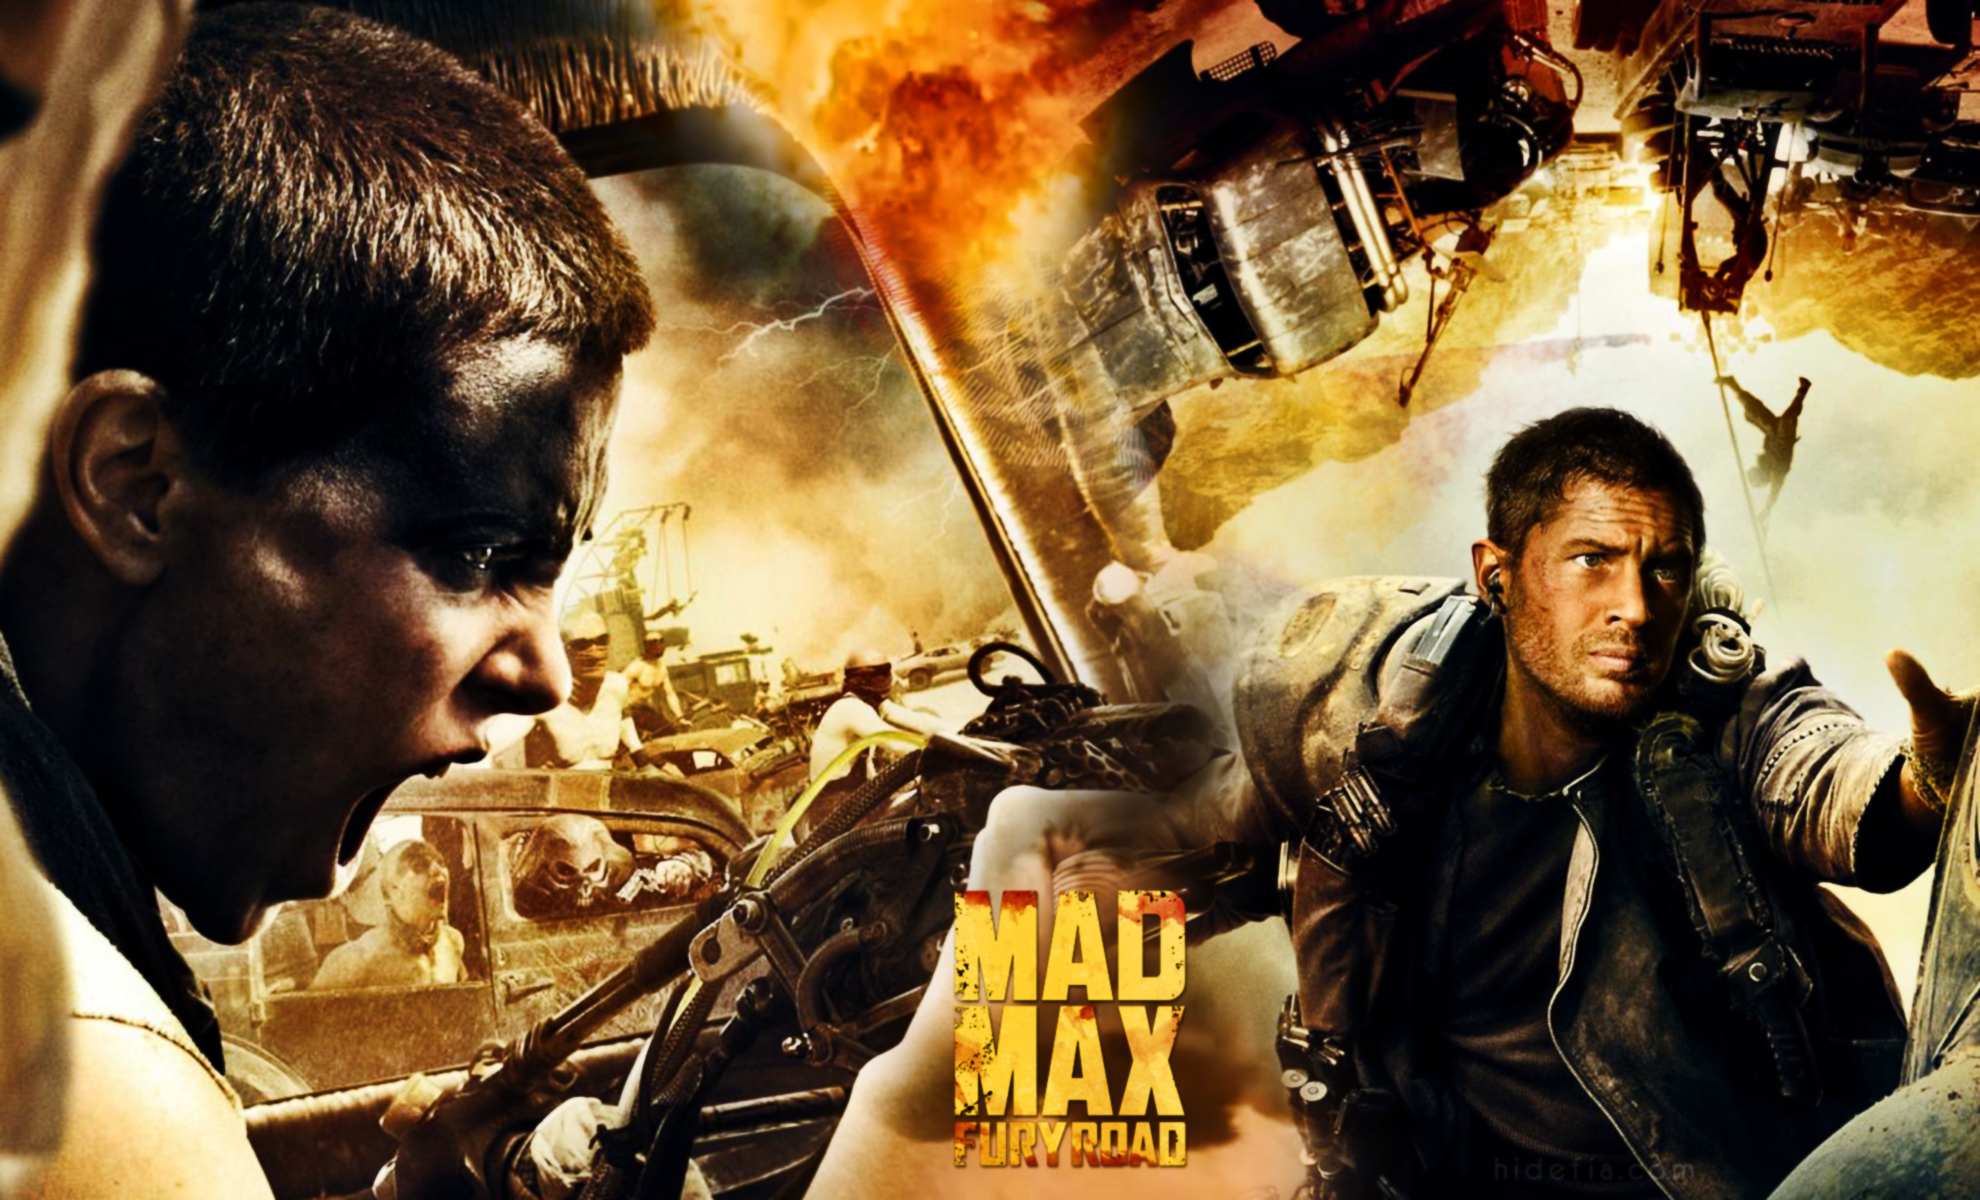 Download Mad Max Fury Road Fighting Movie HD Wallpaper Search